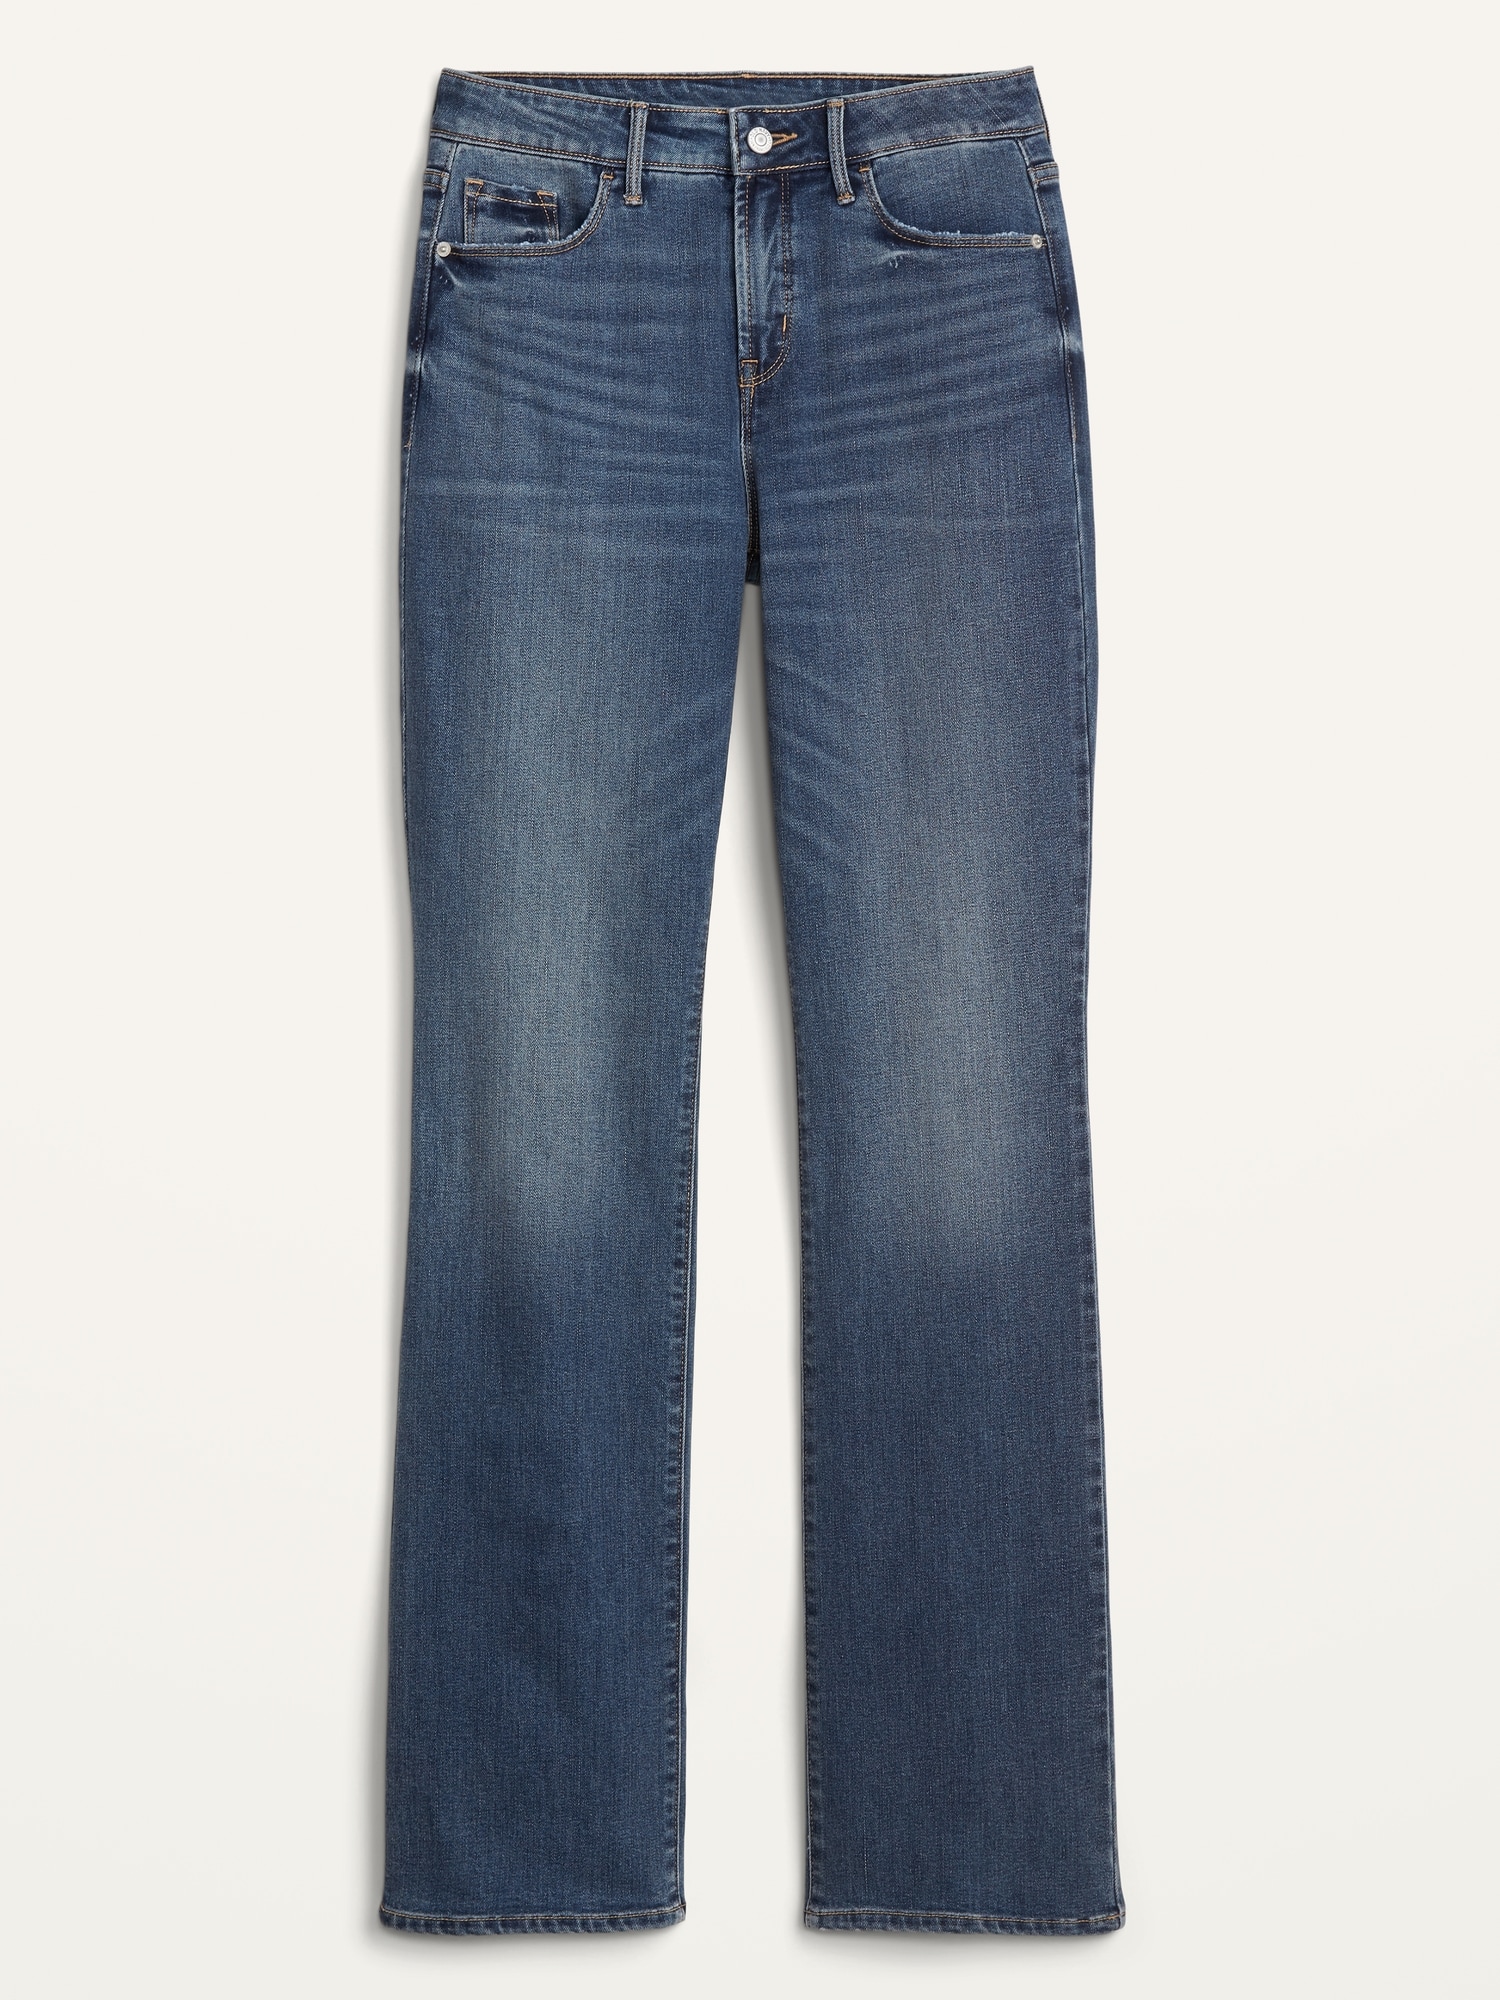 WAKEE LIGHT BLUE HIGH RISE BOOTCUT JEANS